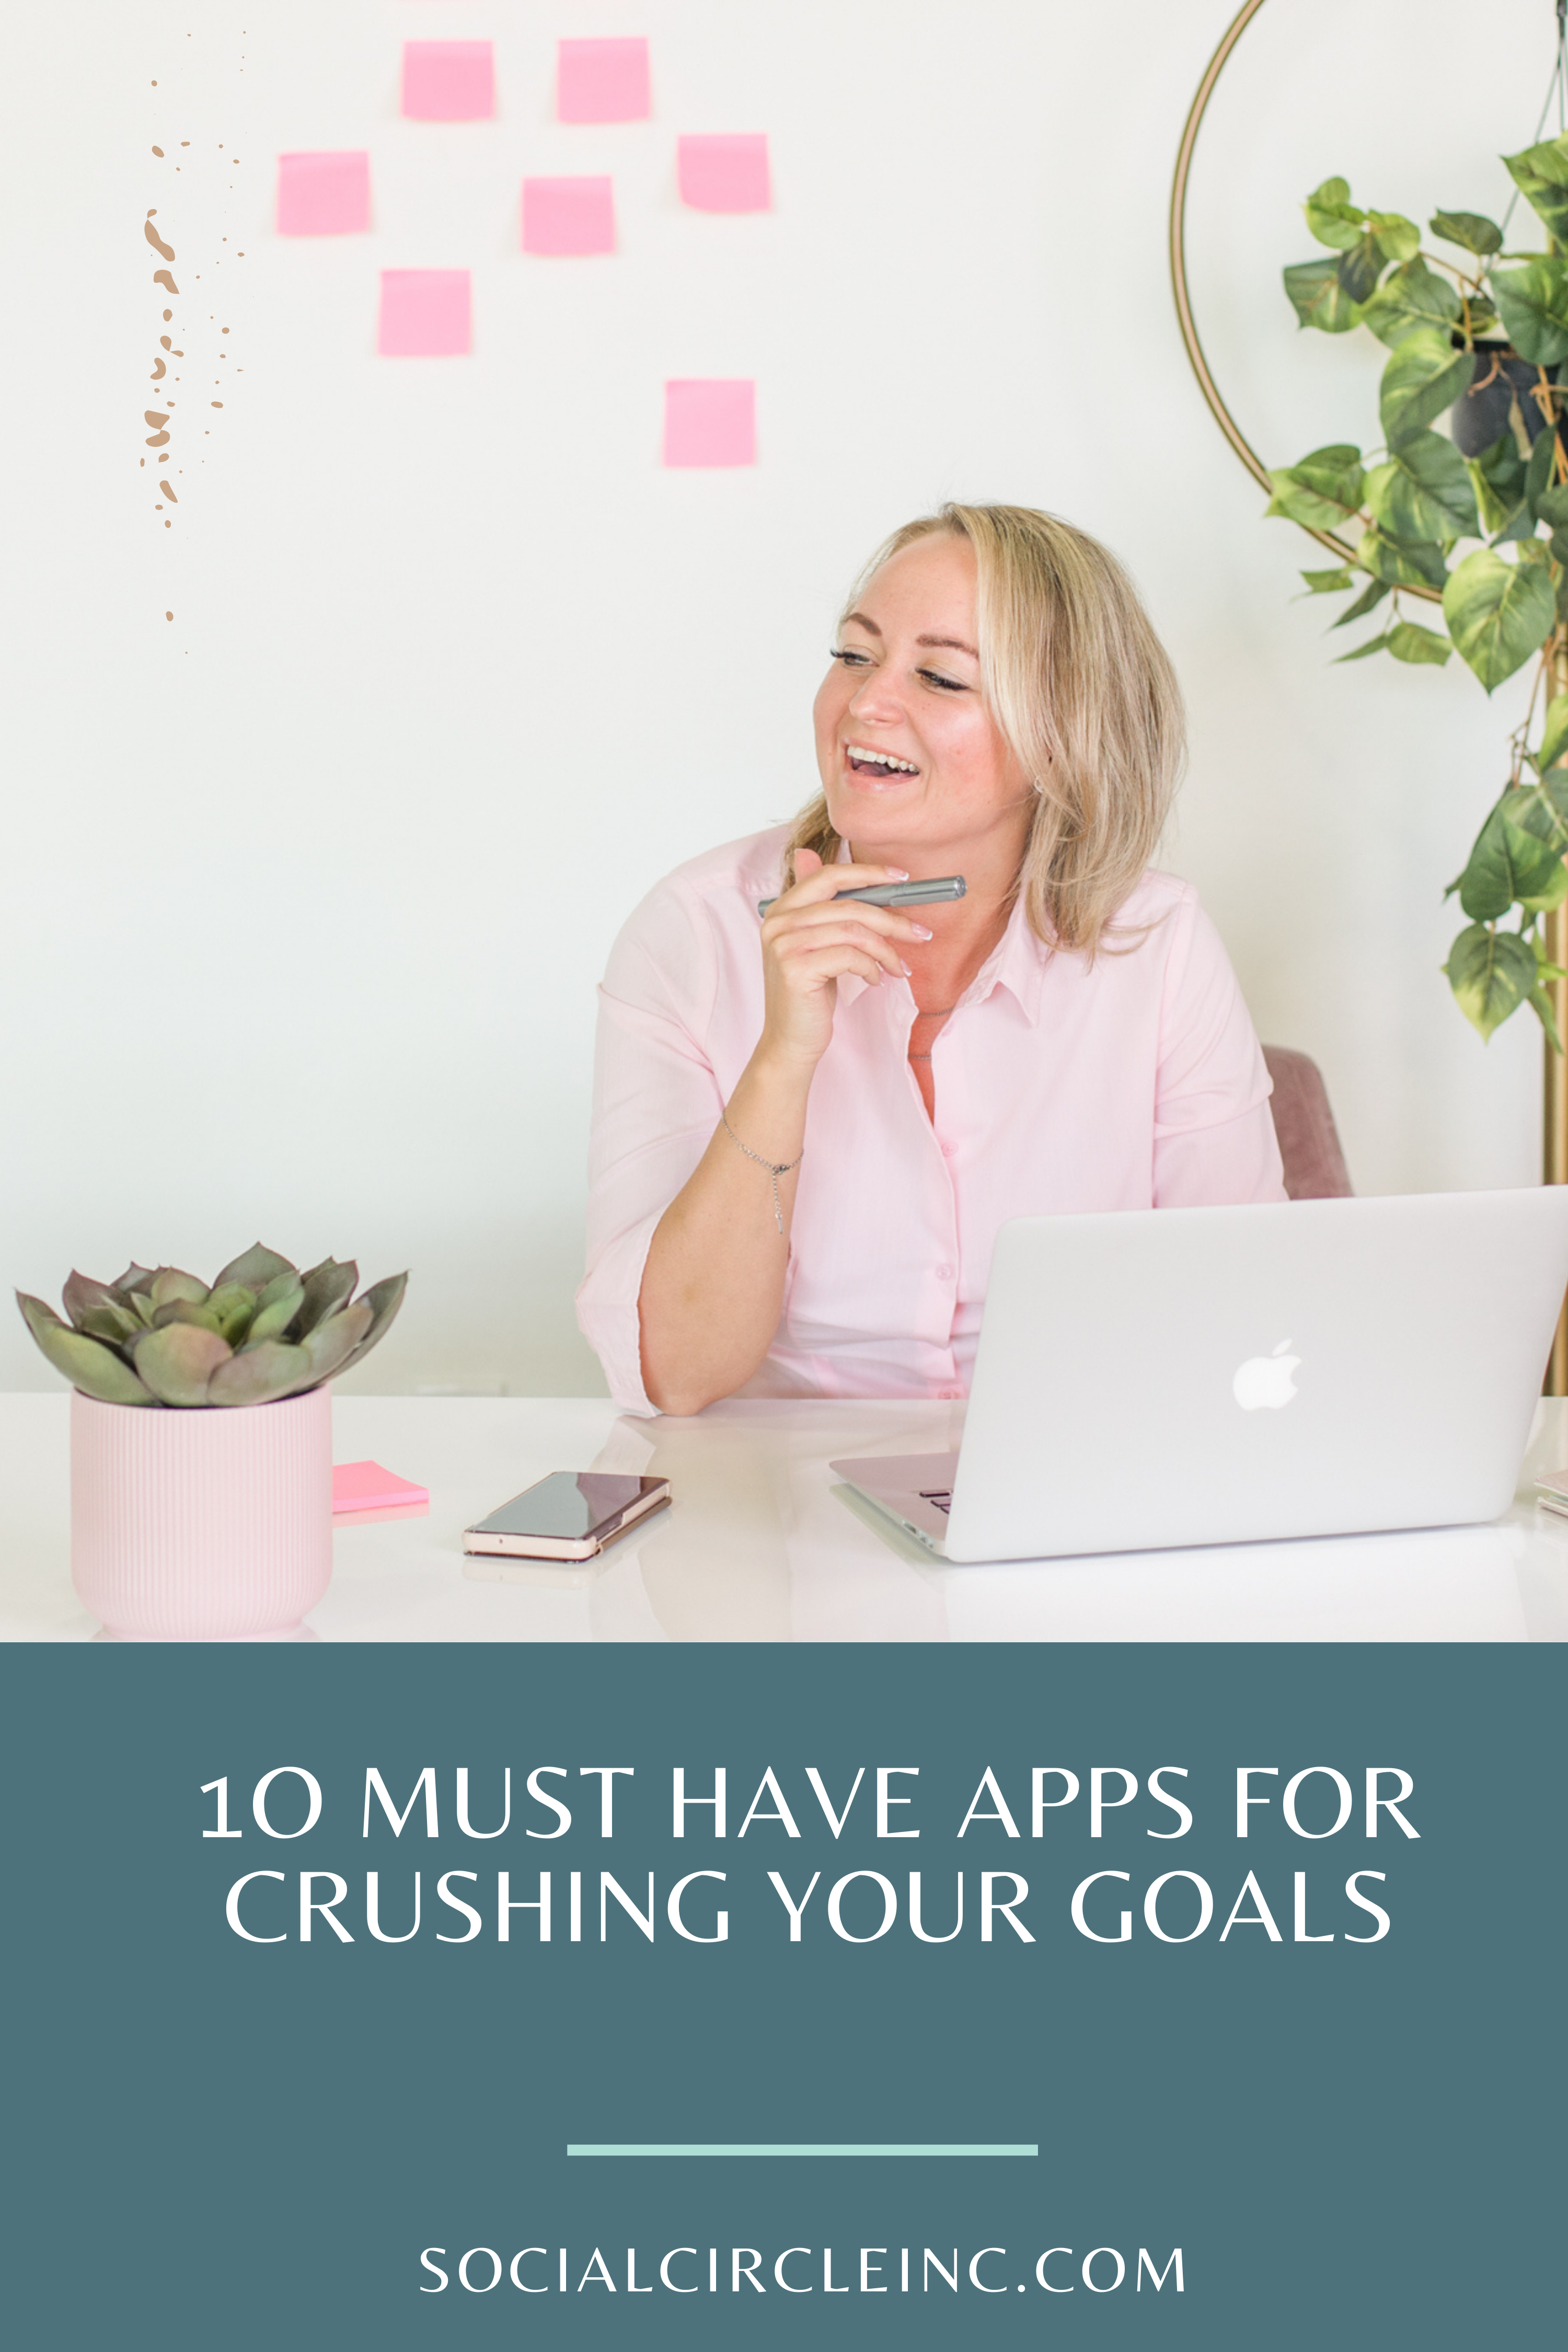 10 Must Have Apps